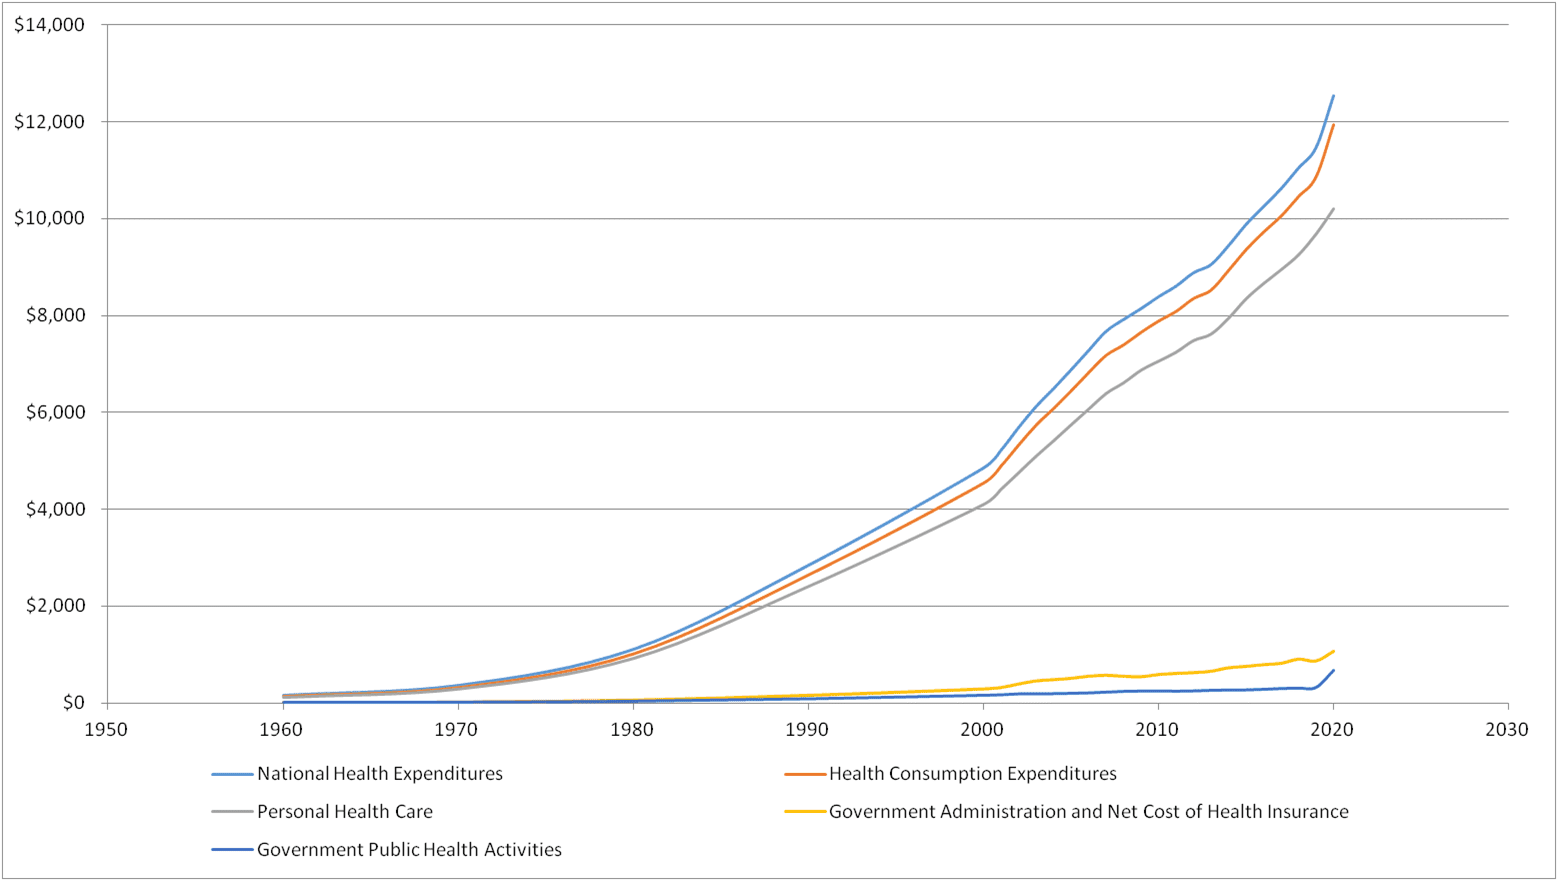 Per capita national health expenditures from 1960-2020